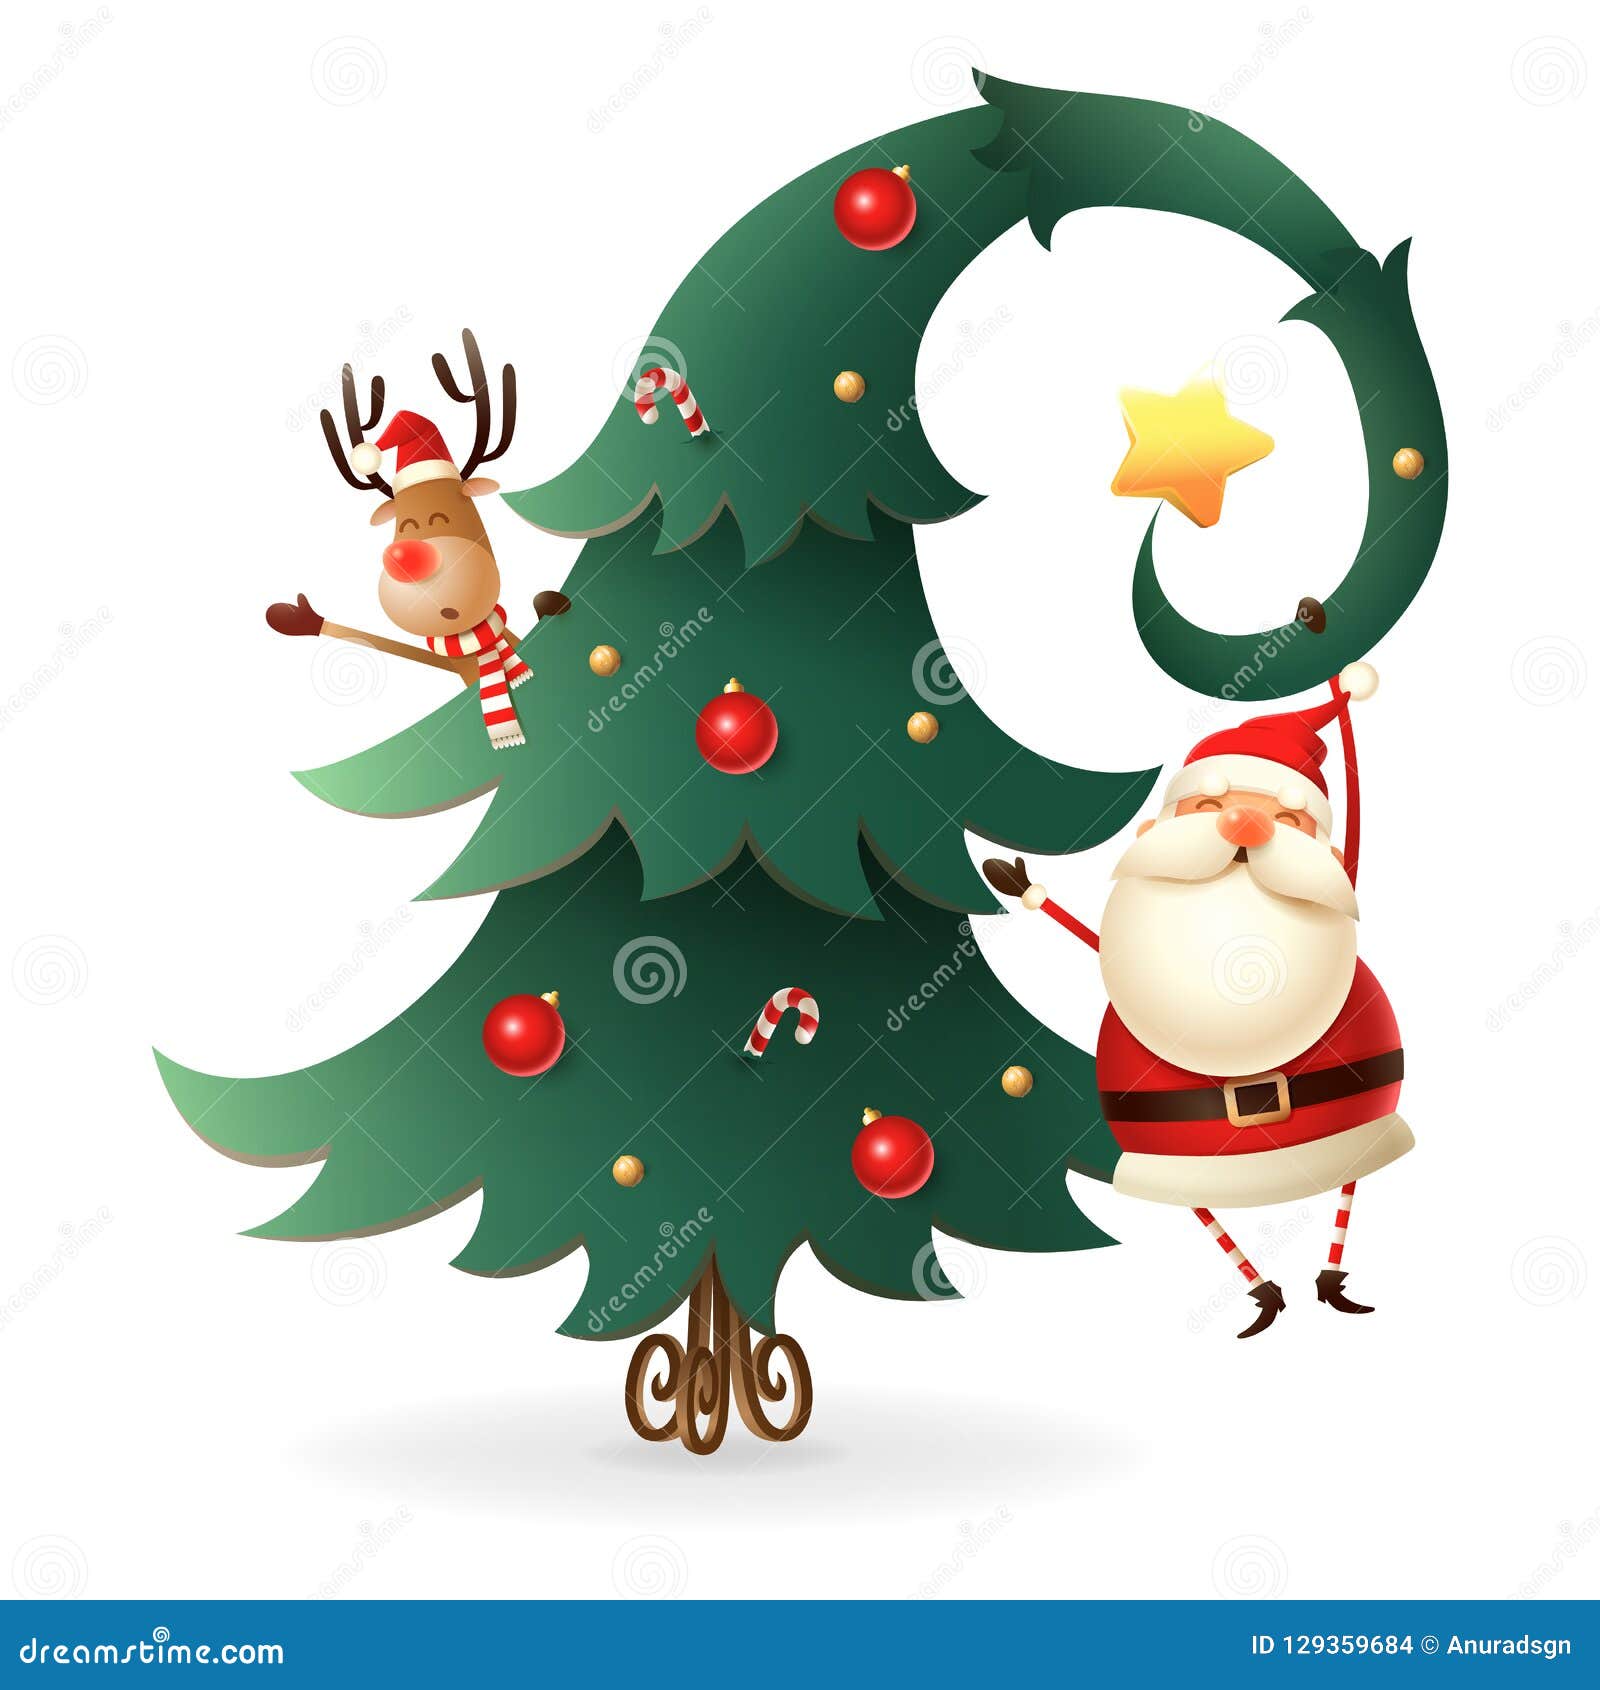 santa claus and reindeer around the christmas tree on transparent background. scandinavian gnomes style.